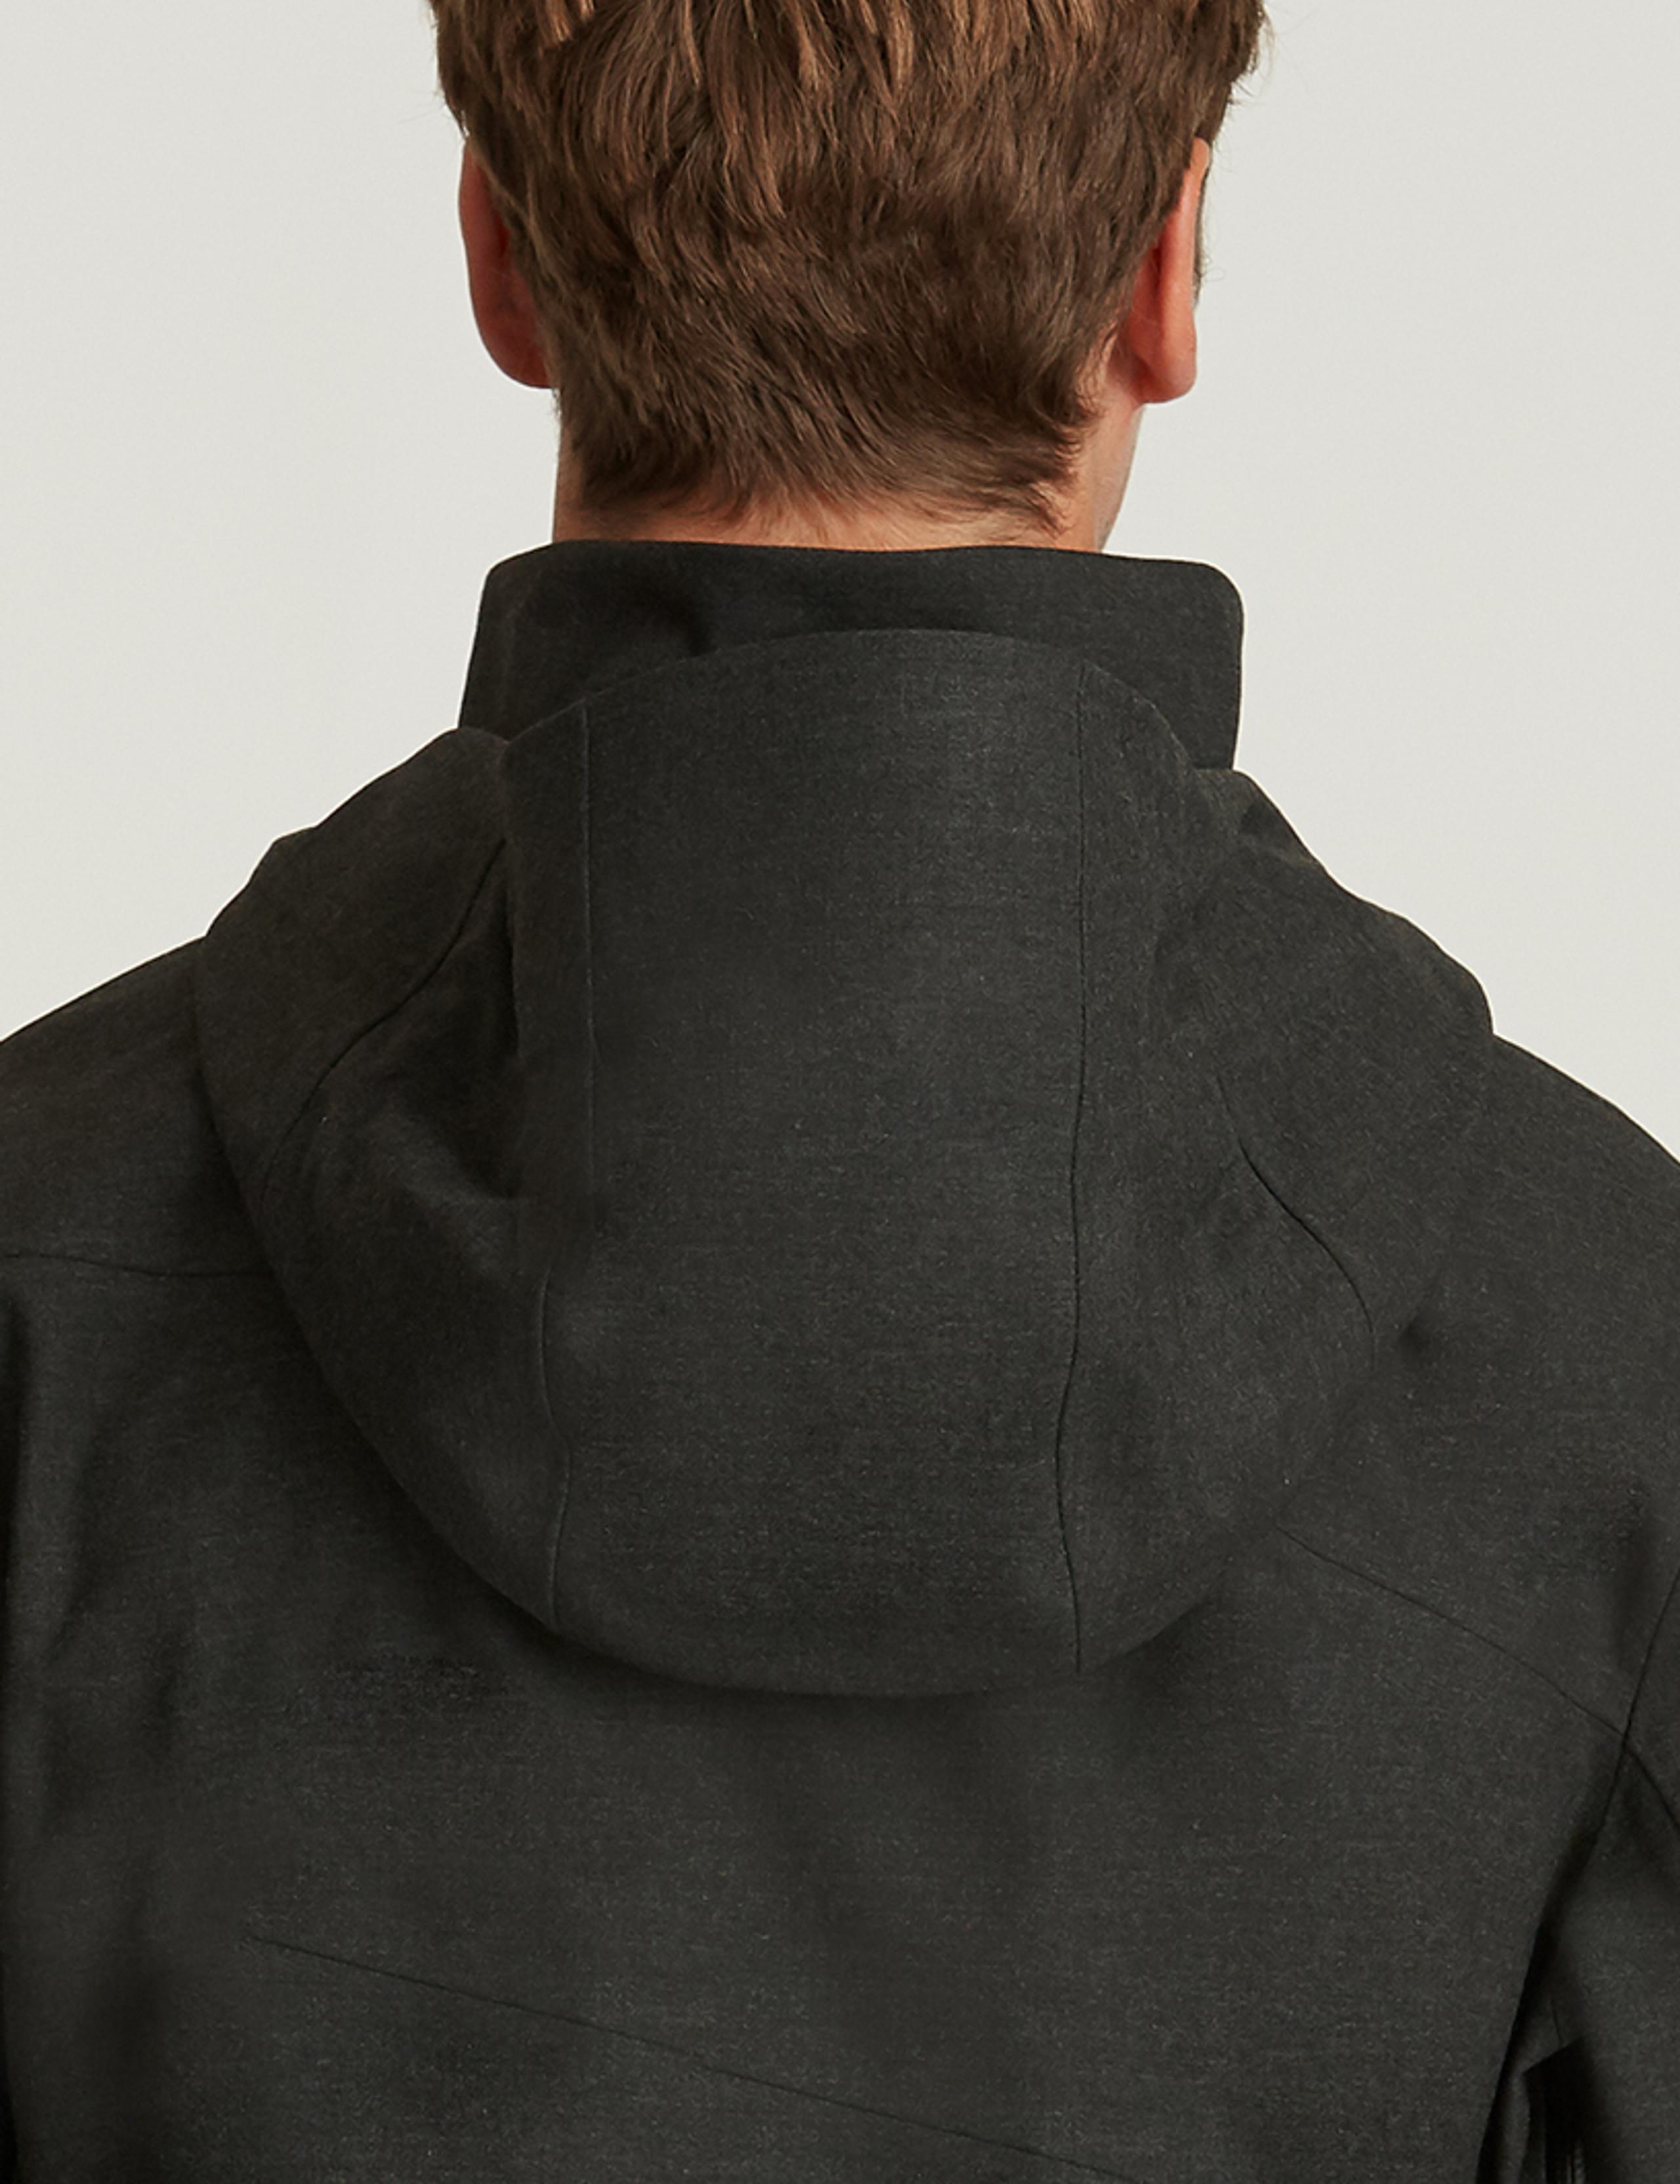 Backview of man wearing Catalyst Snow Shell